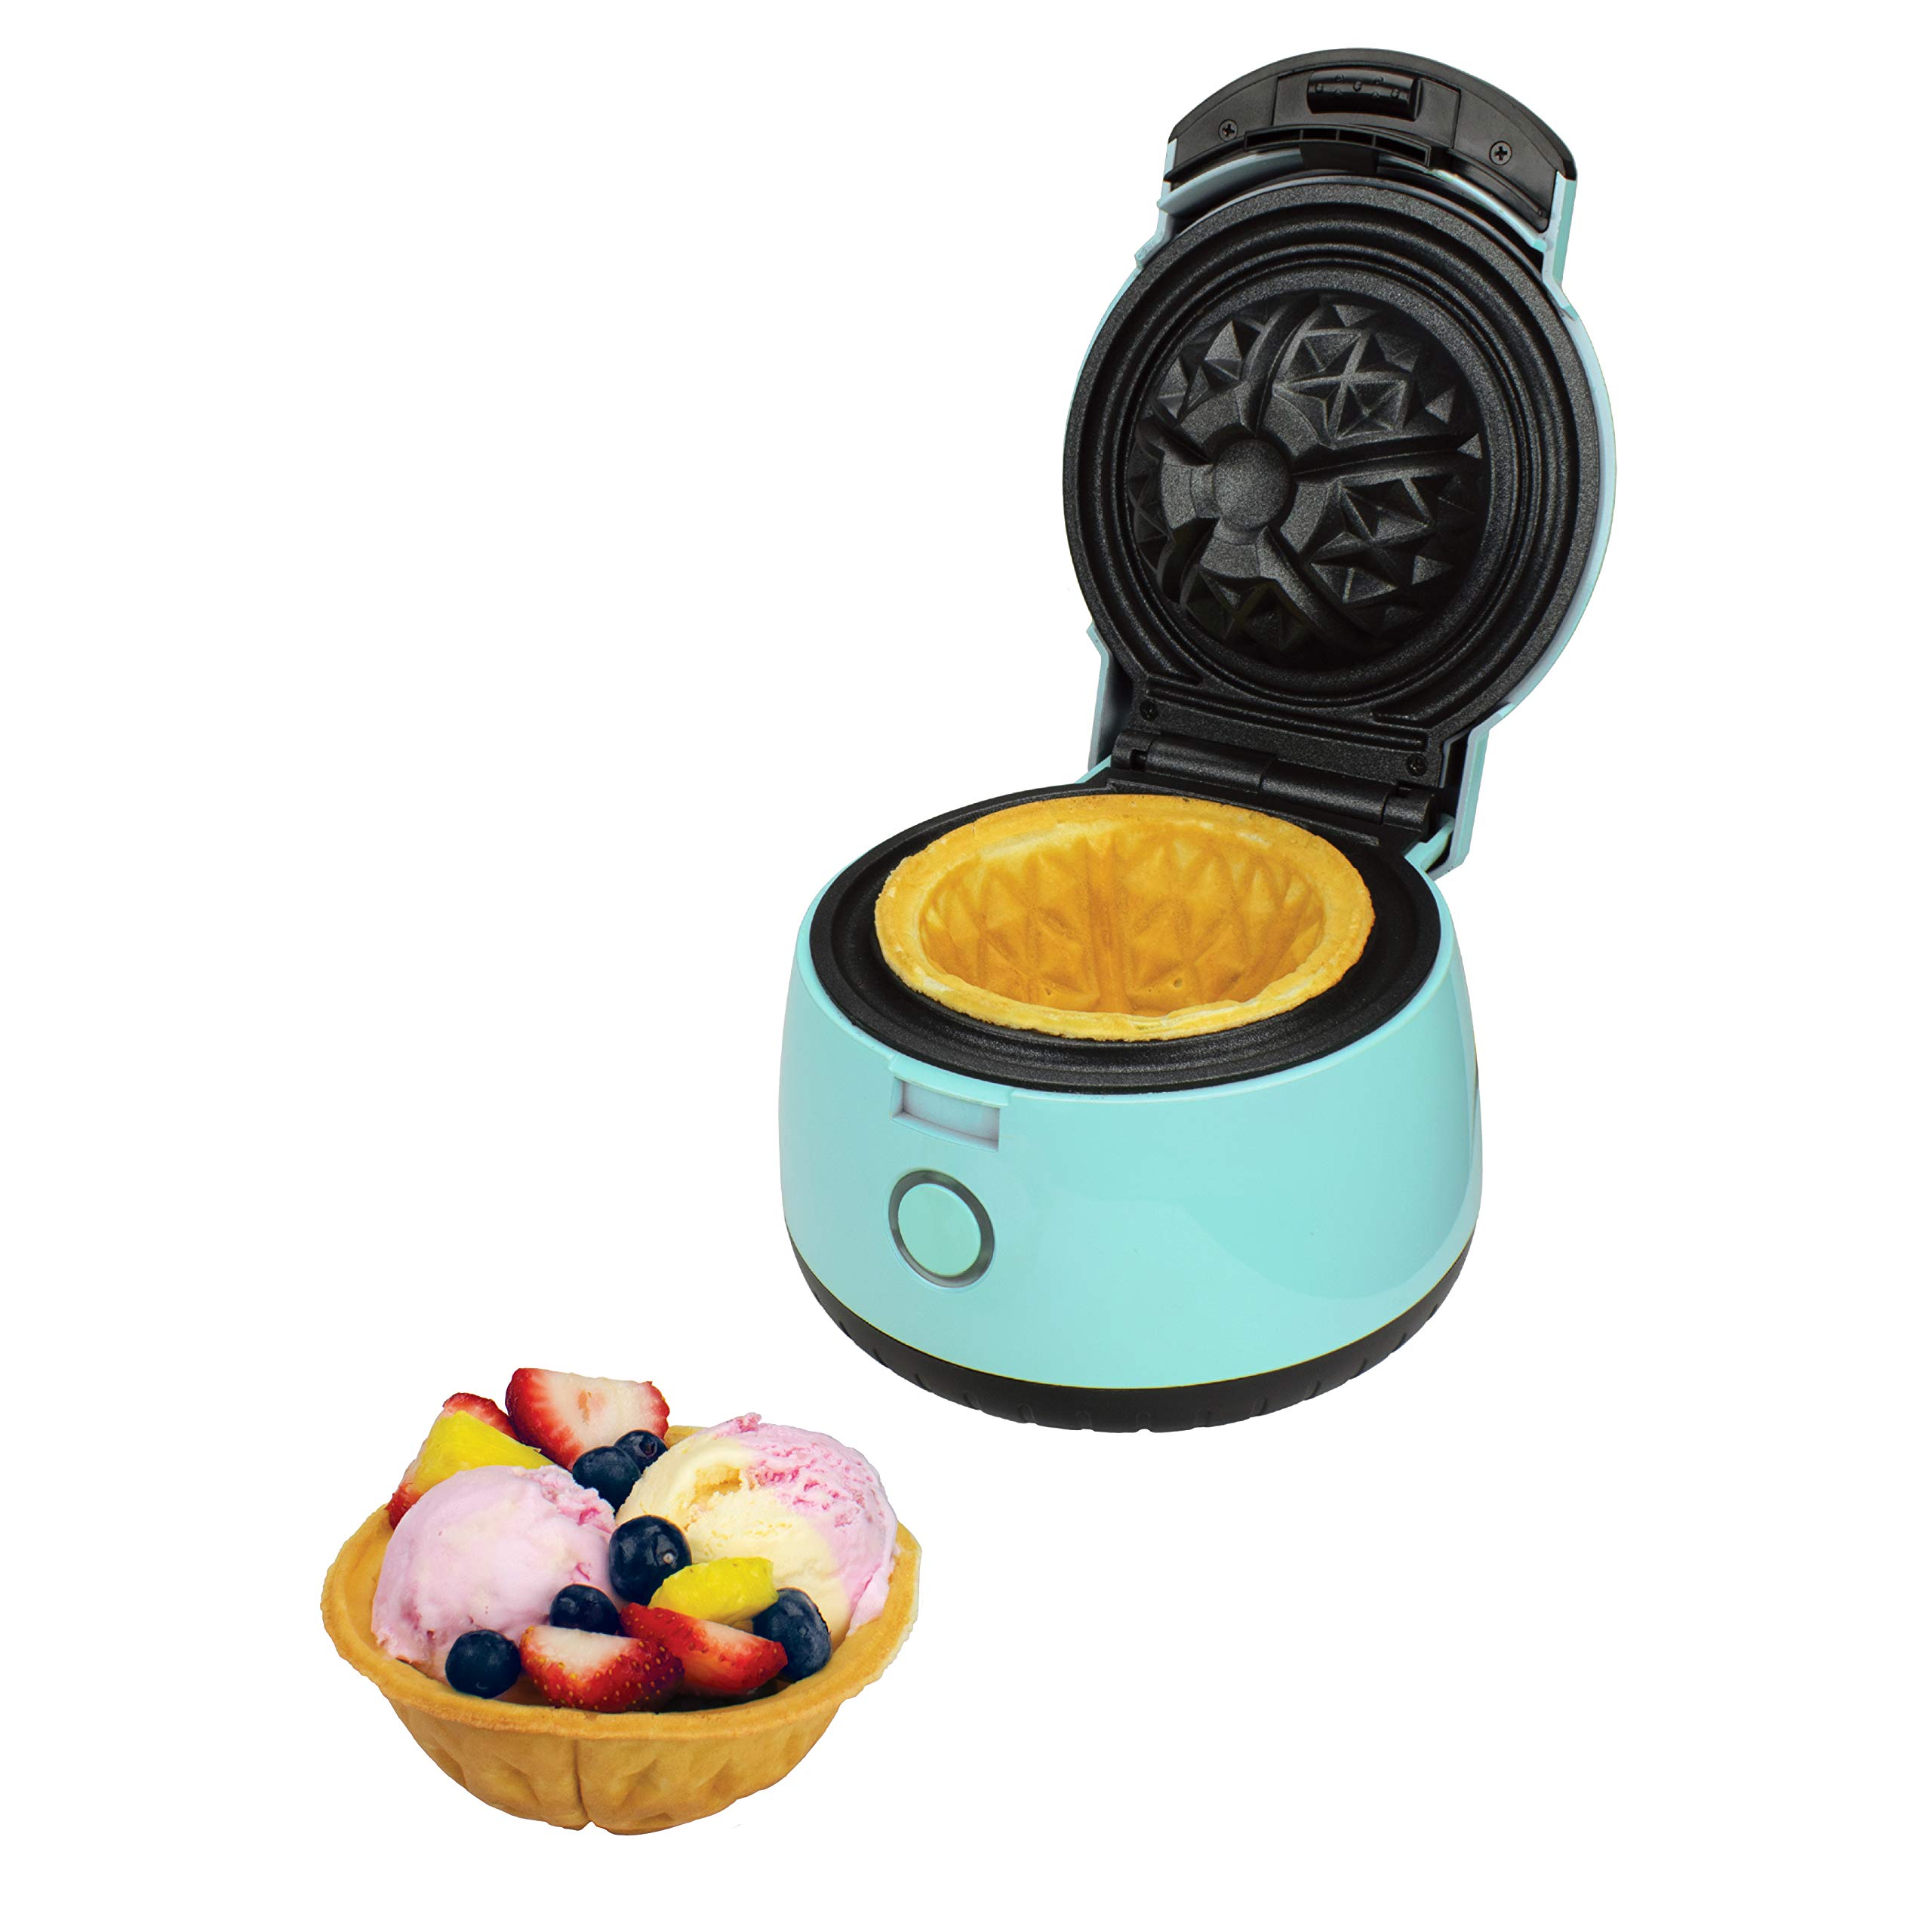 Brentwood TS-1401BL Waffle Bowl Maker, Blue, One Size